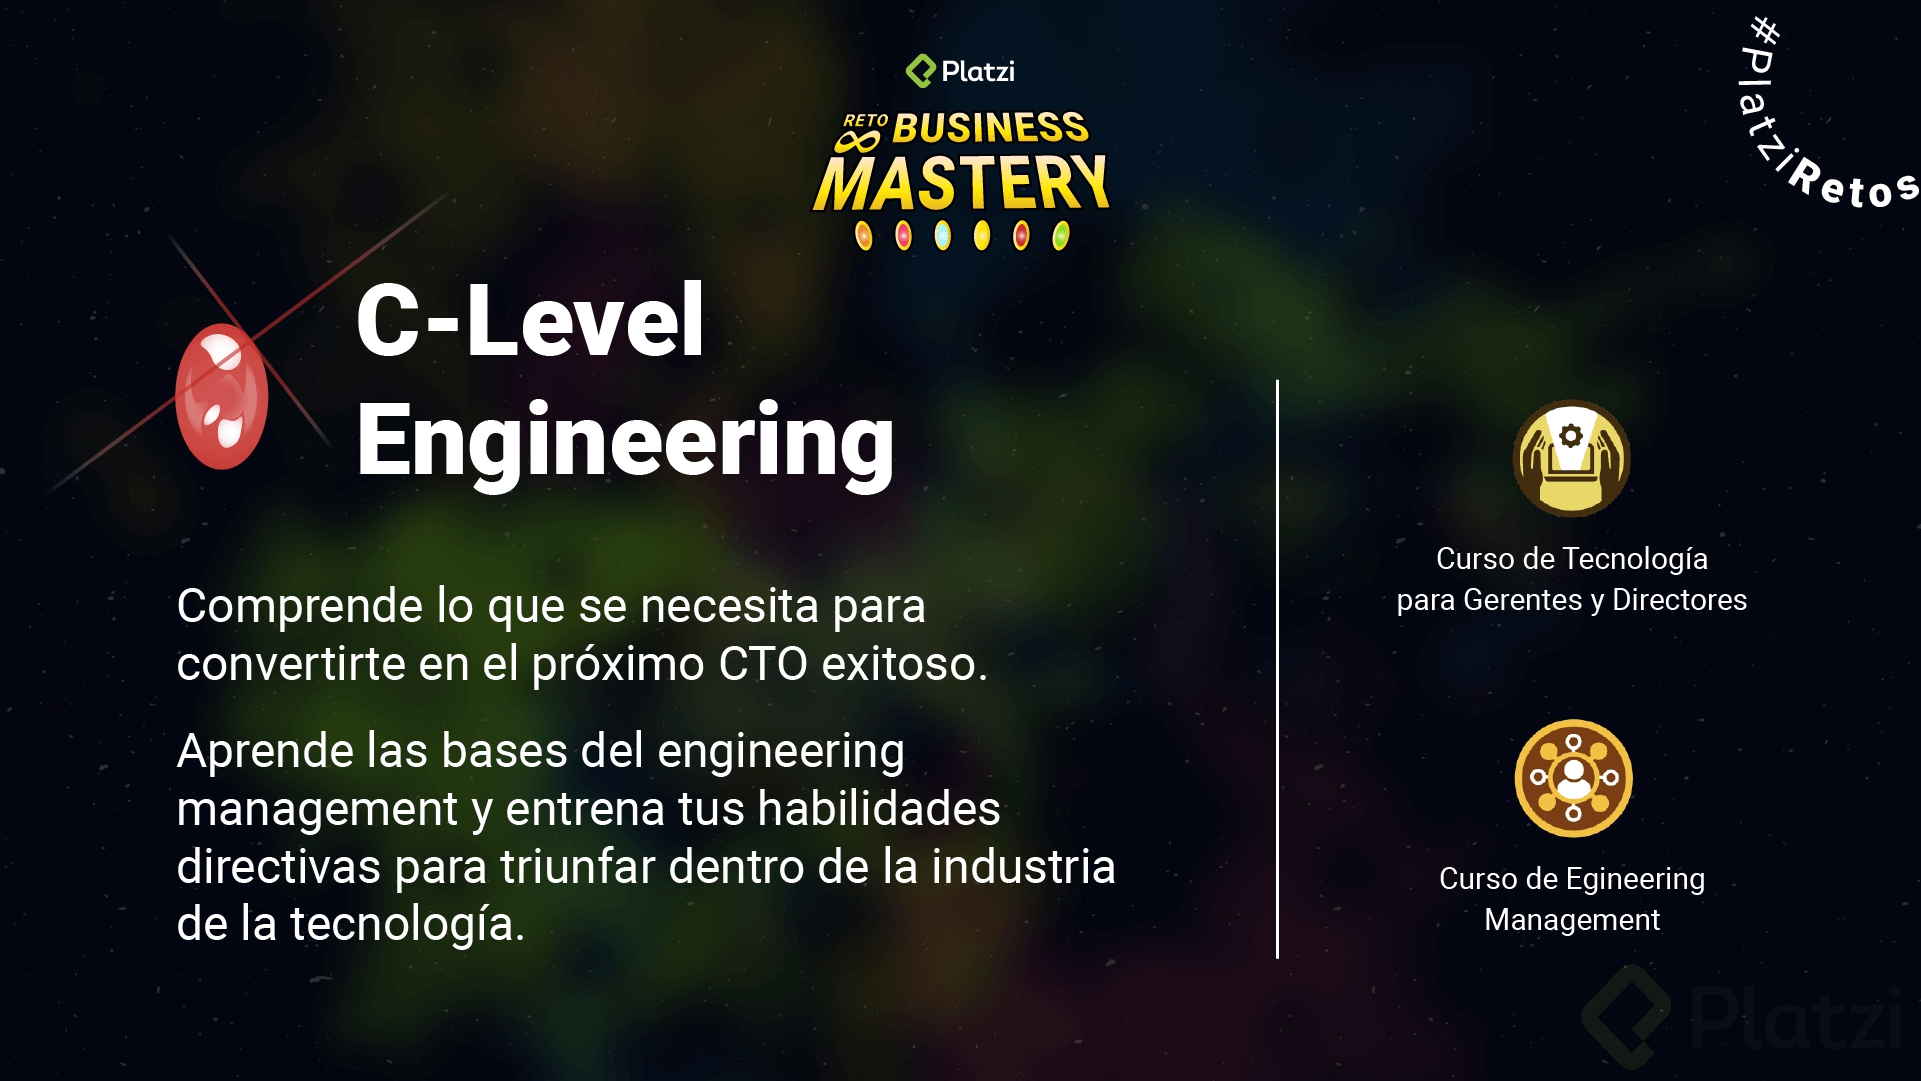 reto-business-mastery_16-9-c-level-engineering.png